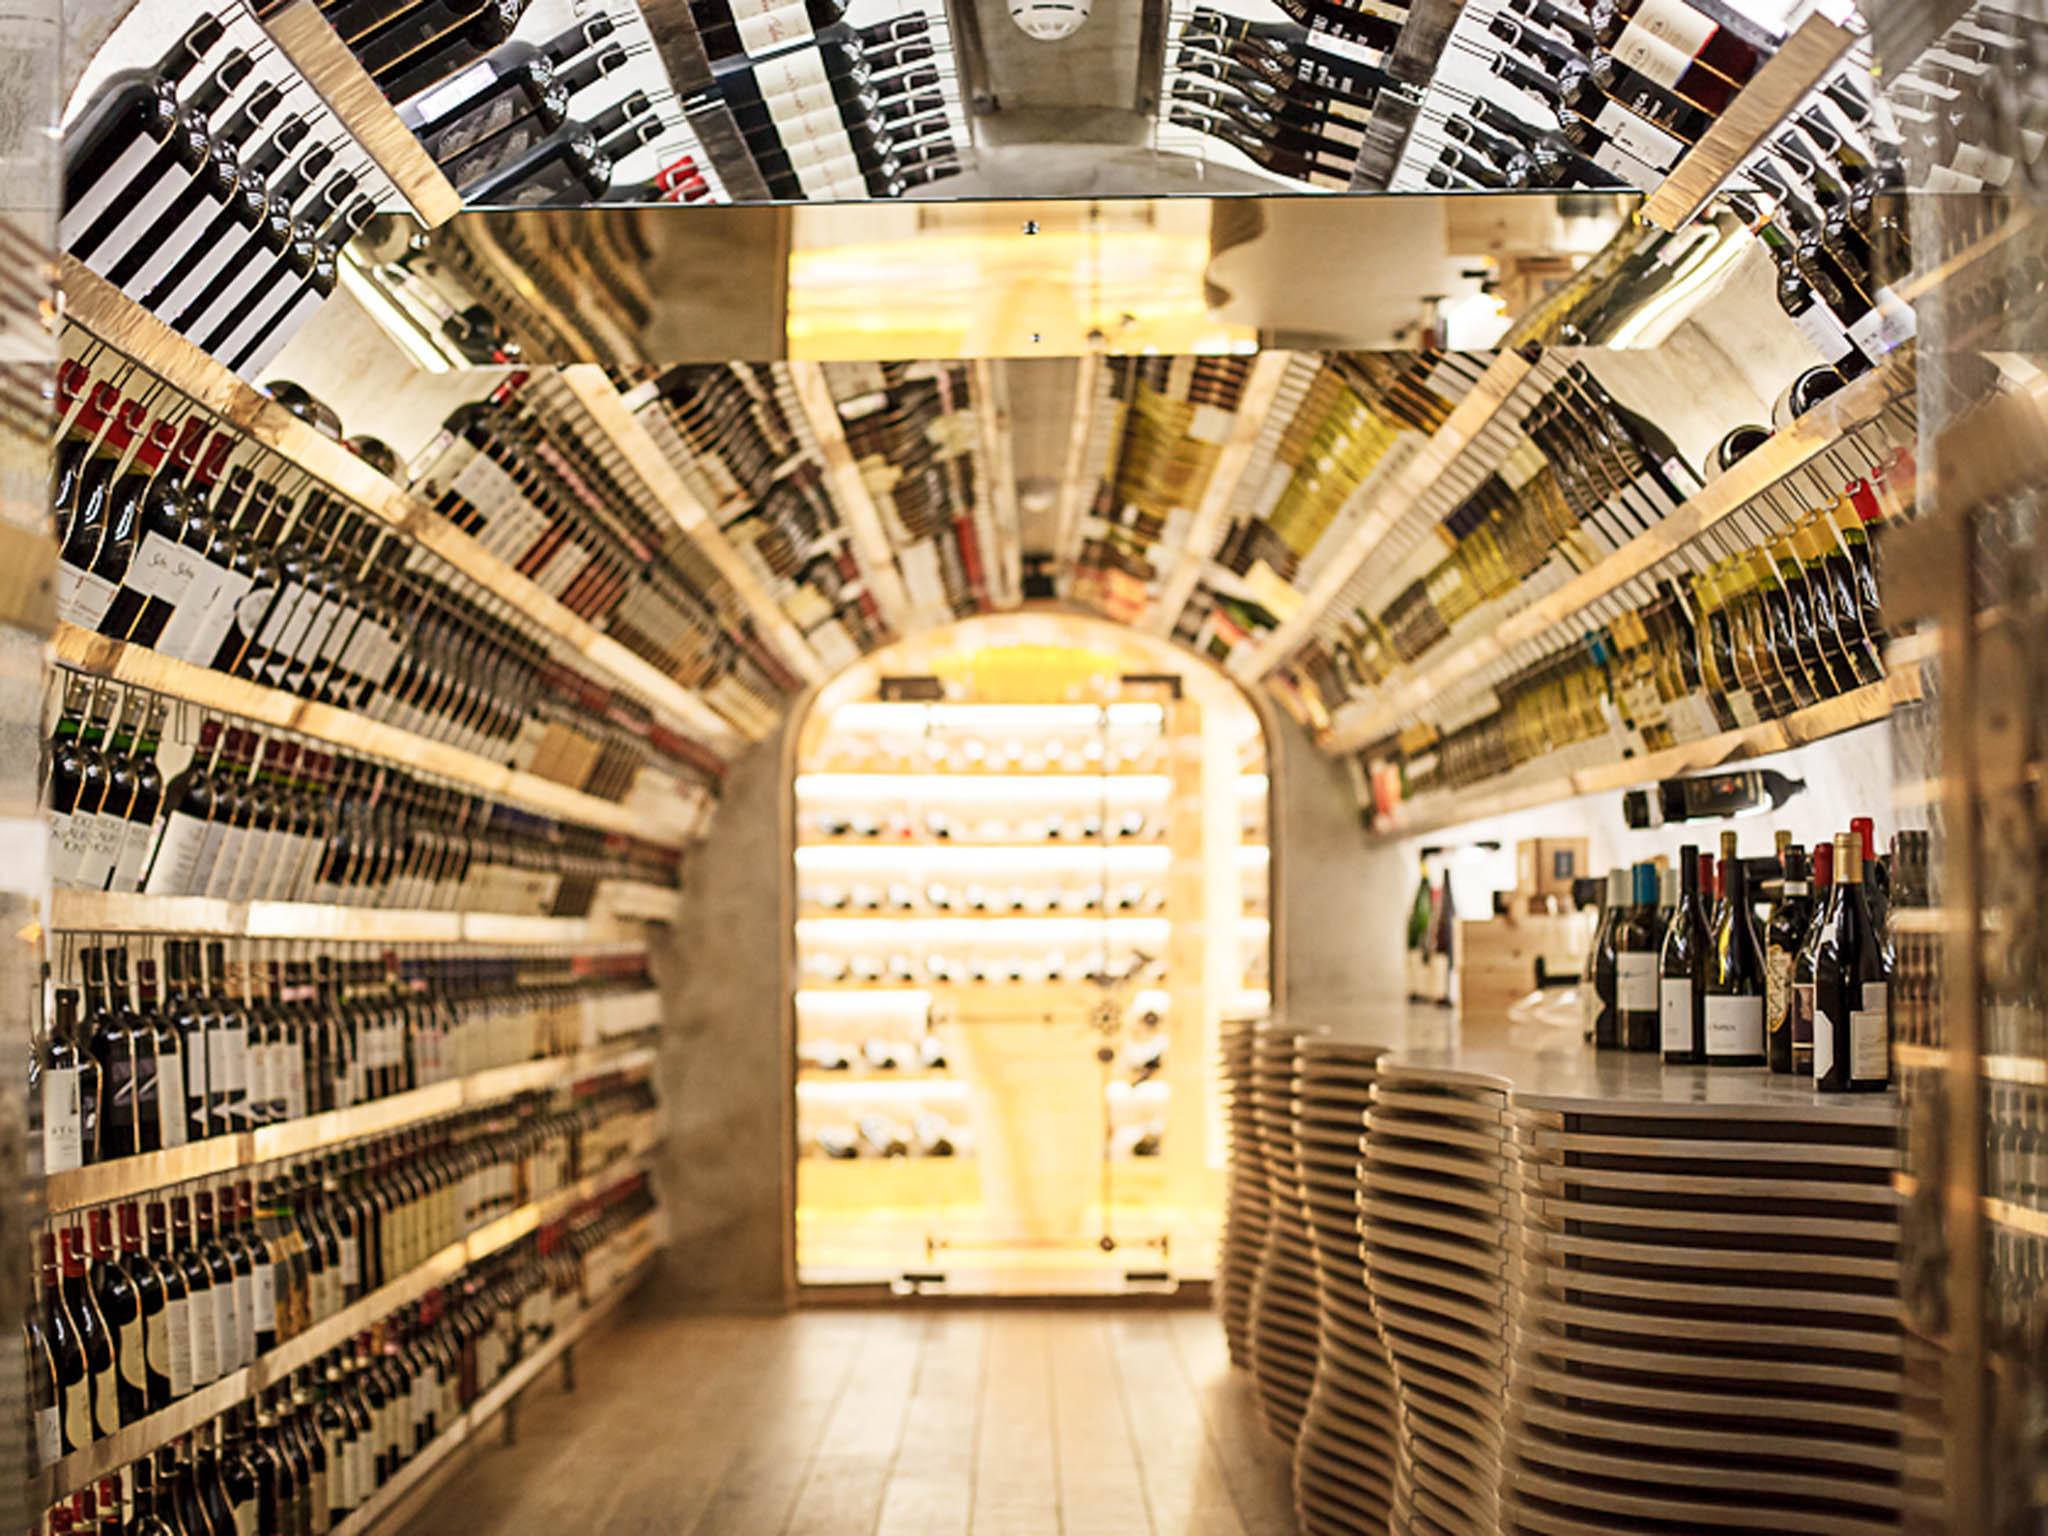 &#13;
To match the food, there's a huge selection of fine wines in?Wine &amp;?Crab's dedicated?vault?(Wine &amp; Crab)&#13;